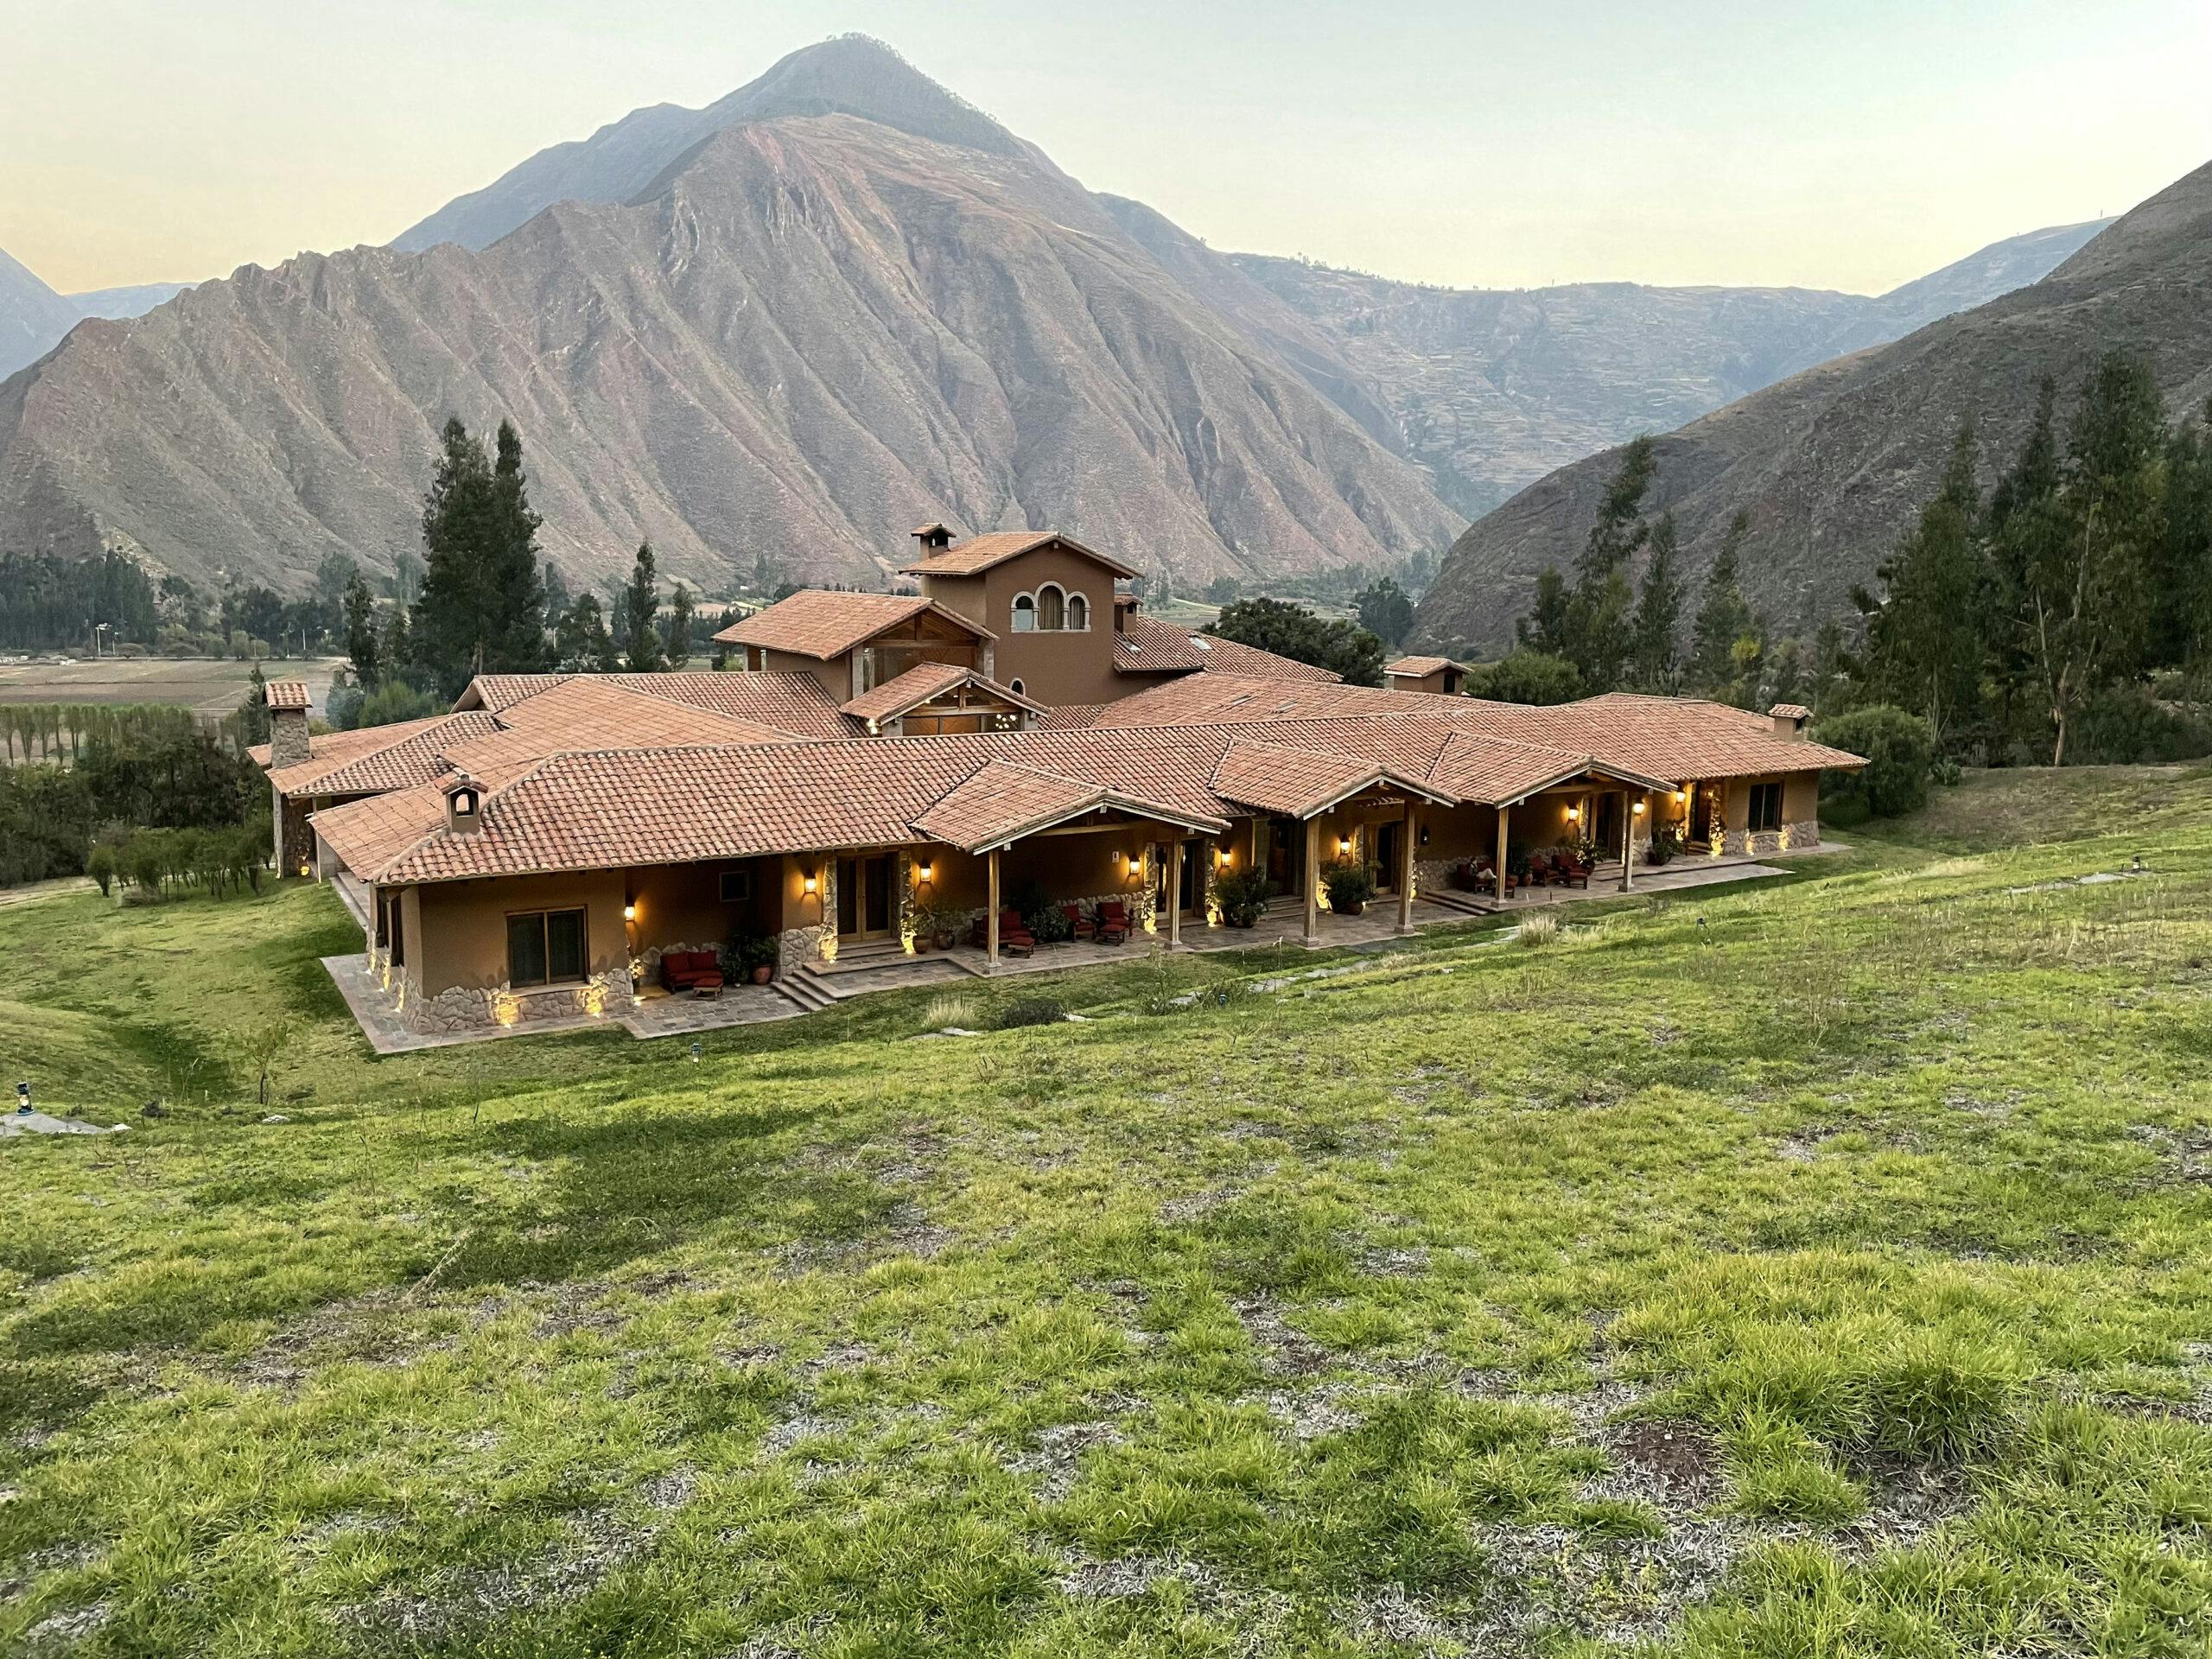 stay at the Inkaterra Hacienda which is along the Sacred Valley trail to Machu Picchu in Chile, South America